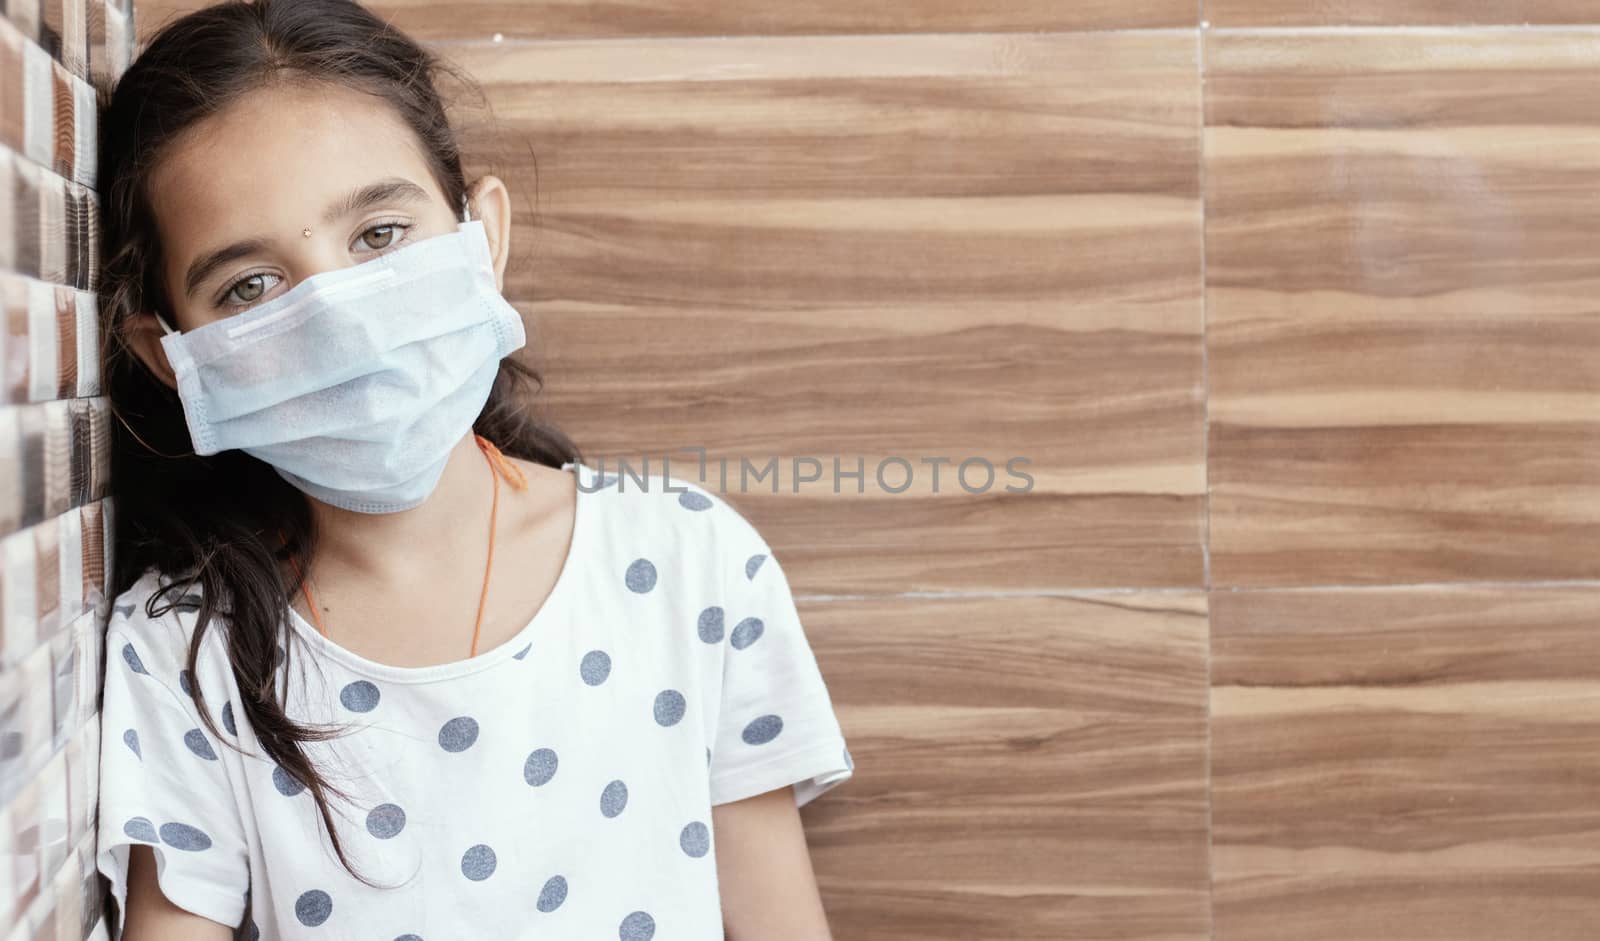 Concept of PTSD or post-traumatic stress disorder after covid-19 or coronavirus pandemic - Young teenager girl with medical mask wearing sat by leaning on well in sad, fear, or anxiety. by lakshmiprasad.maski@gmai.com